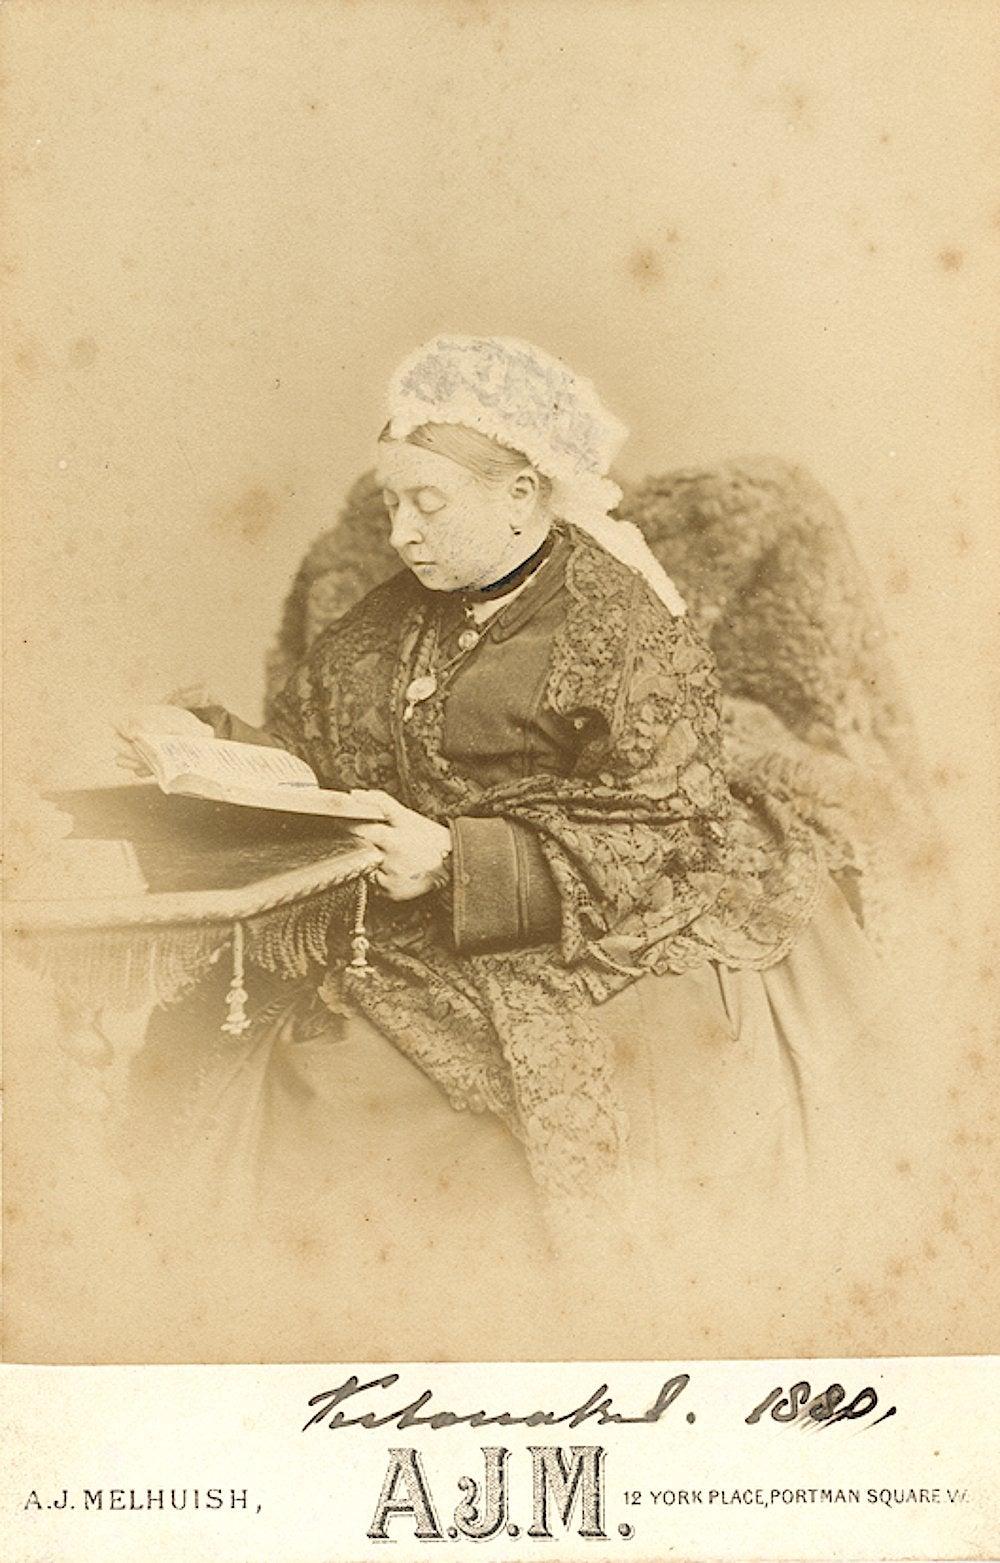 A signed photographic postcard of Queen Victoria.
Few British rulers have cast as long a shadow as Queen Victoria. Her reign lasted 63 years, which stood as the record up until great-granddaughter Elizabeth II surpassed her in 2015.

Britain was